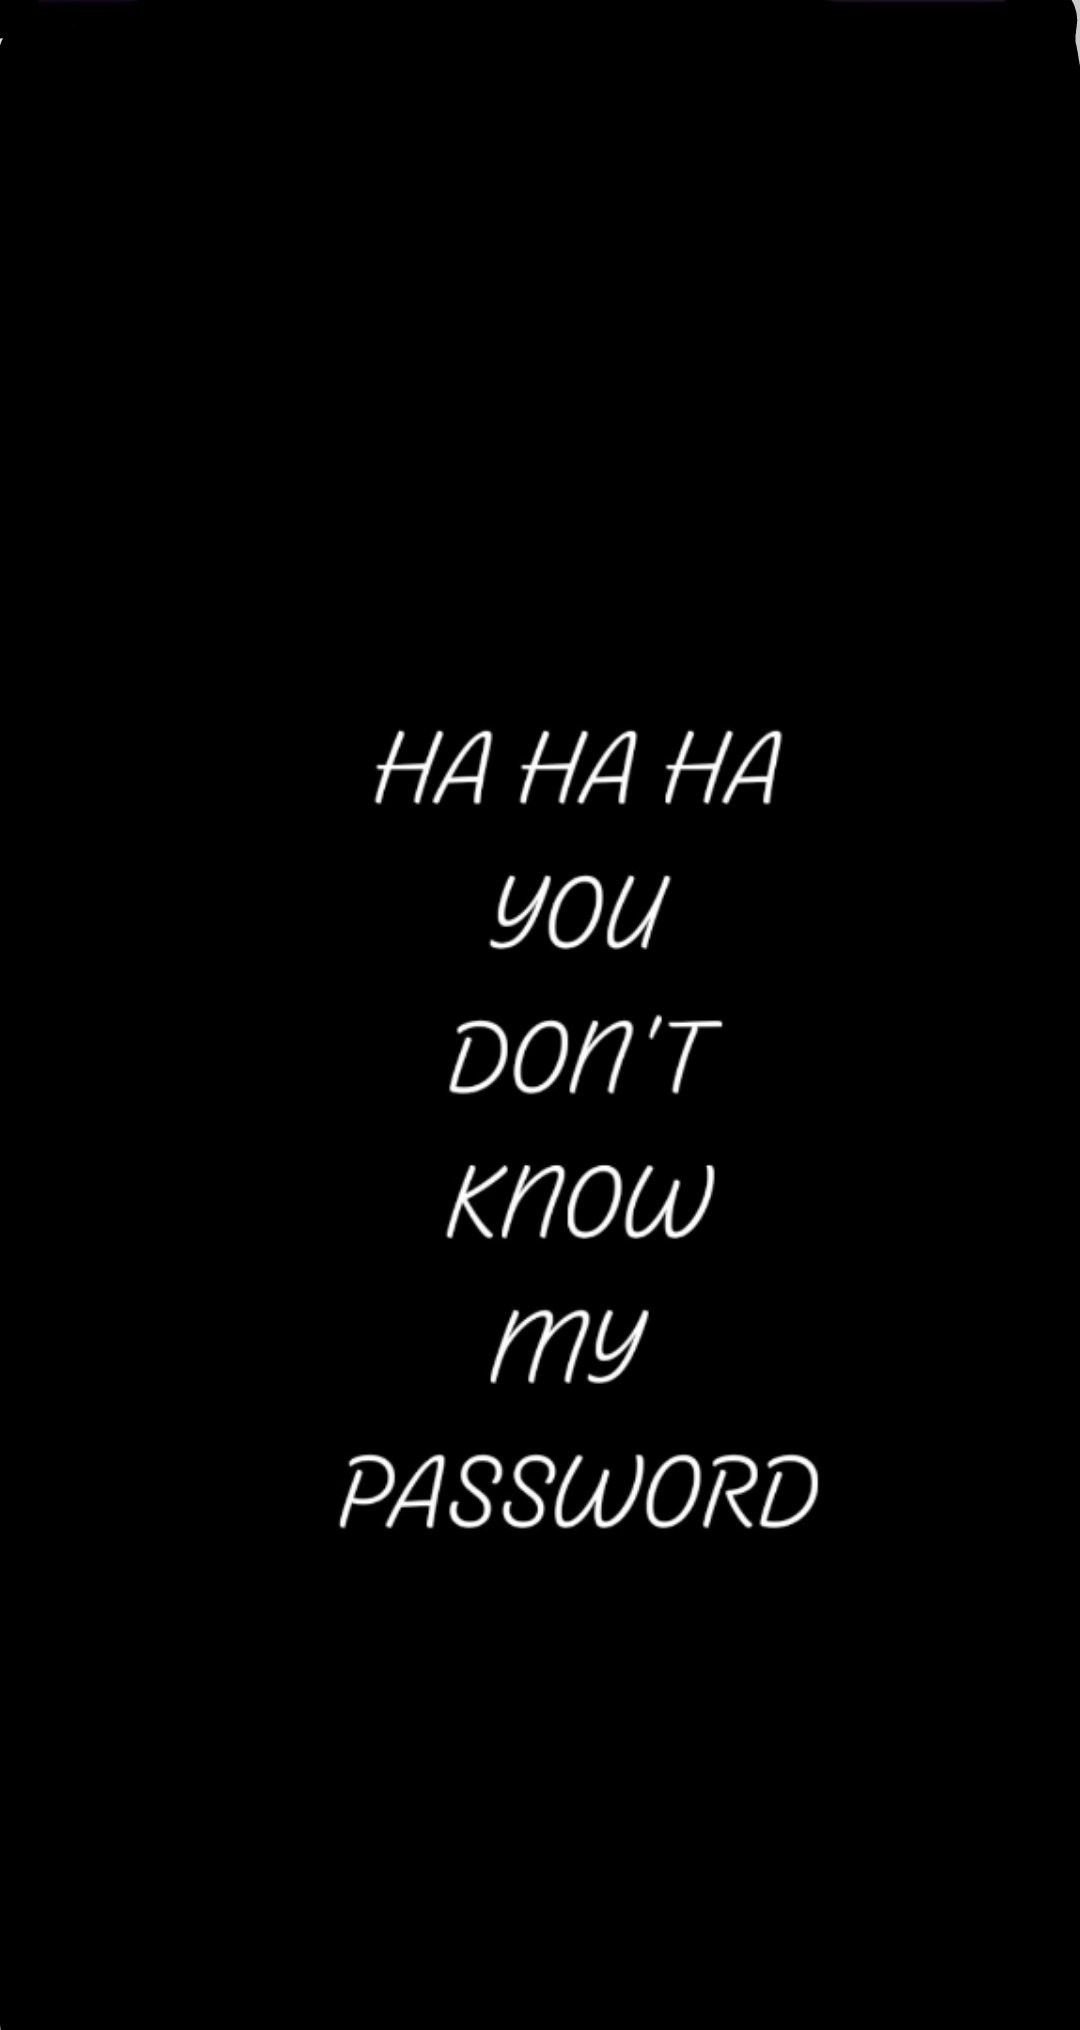 Blackbackground you don't know my password